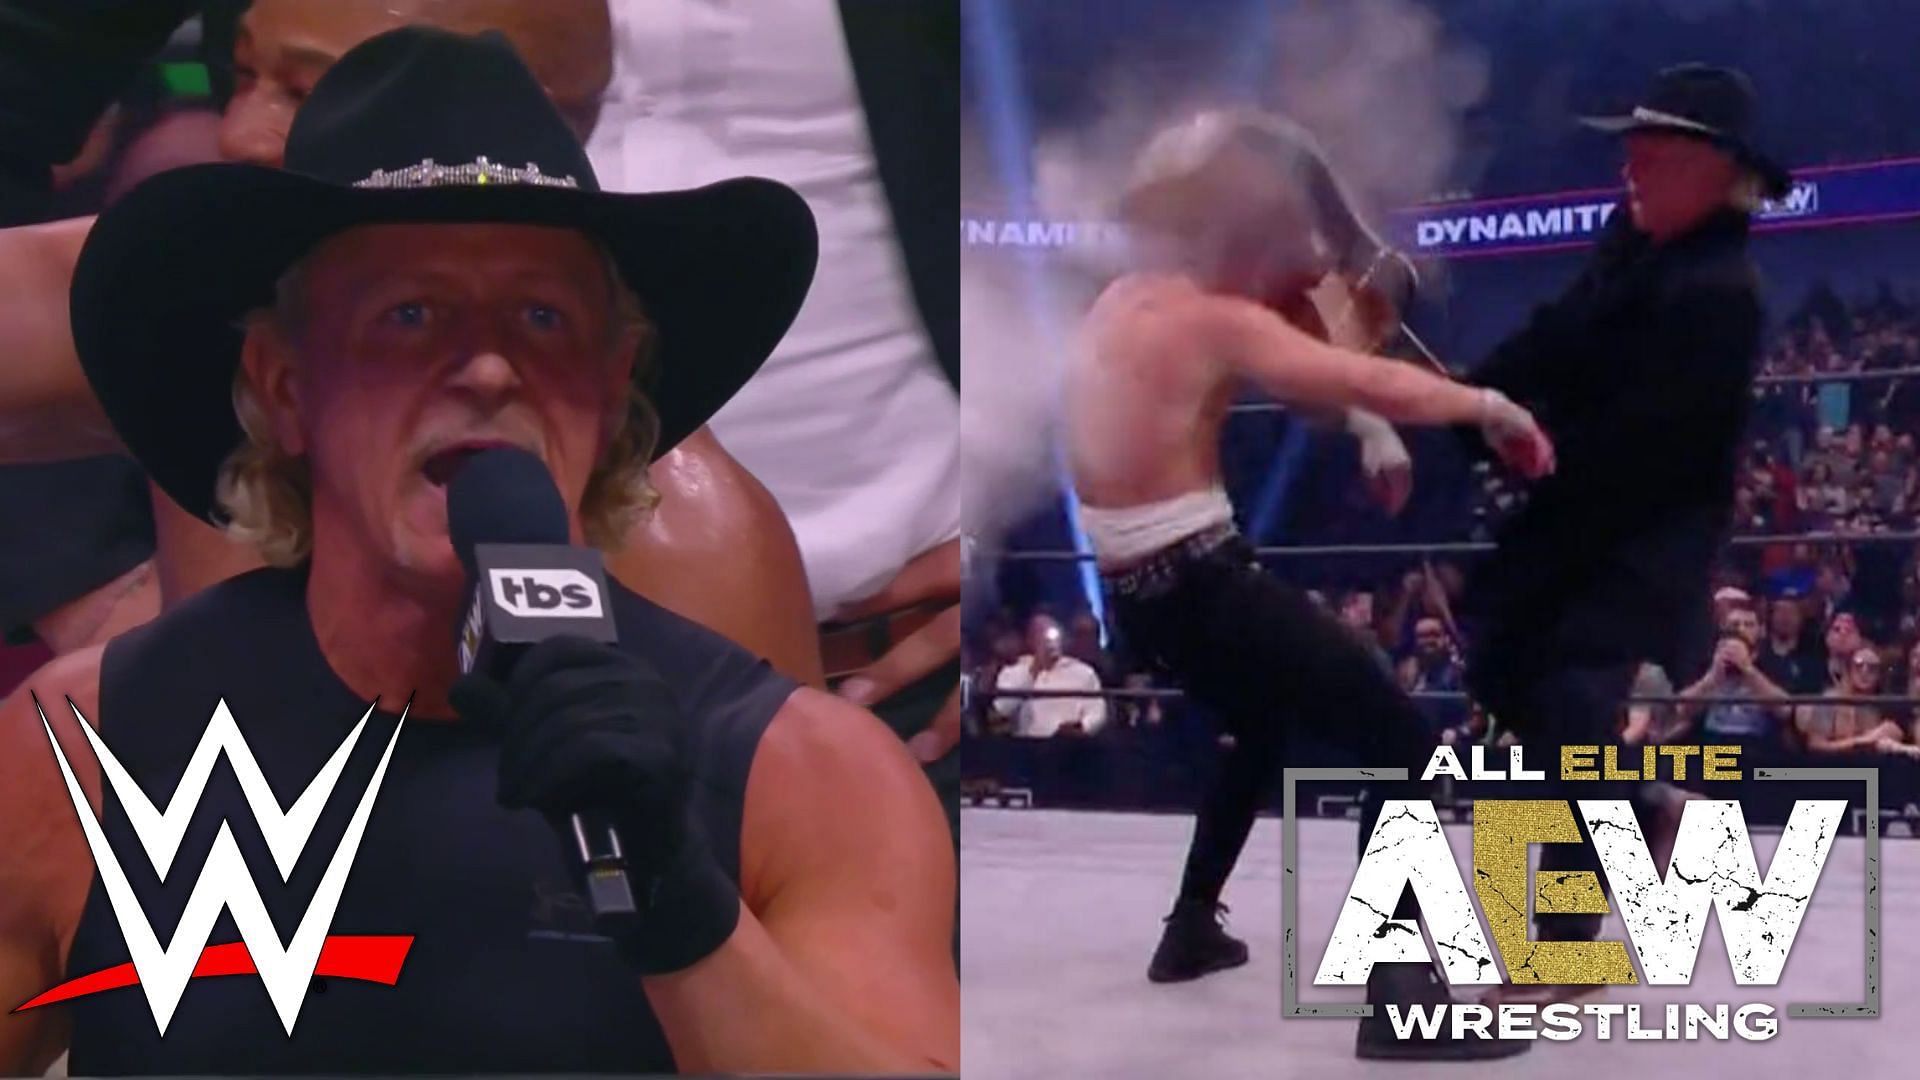 Jeff Jarret has now joined the ranks of AEW.